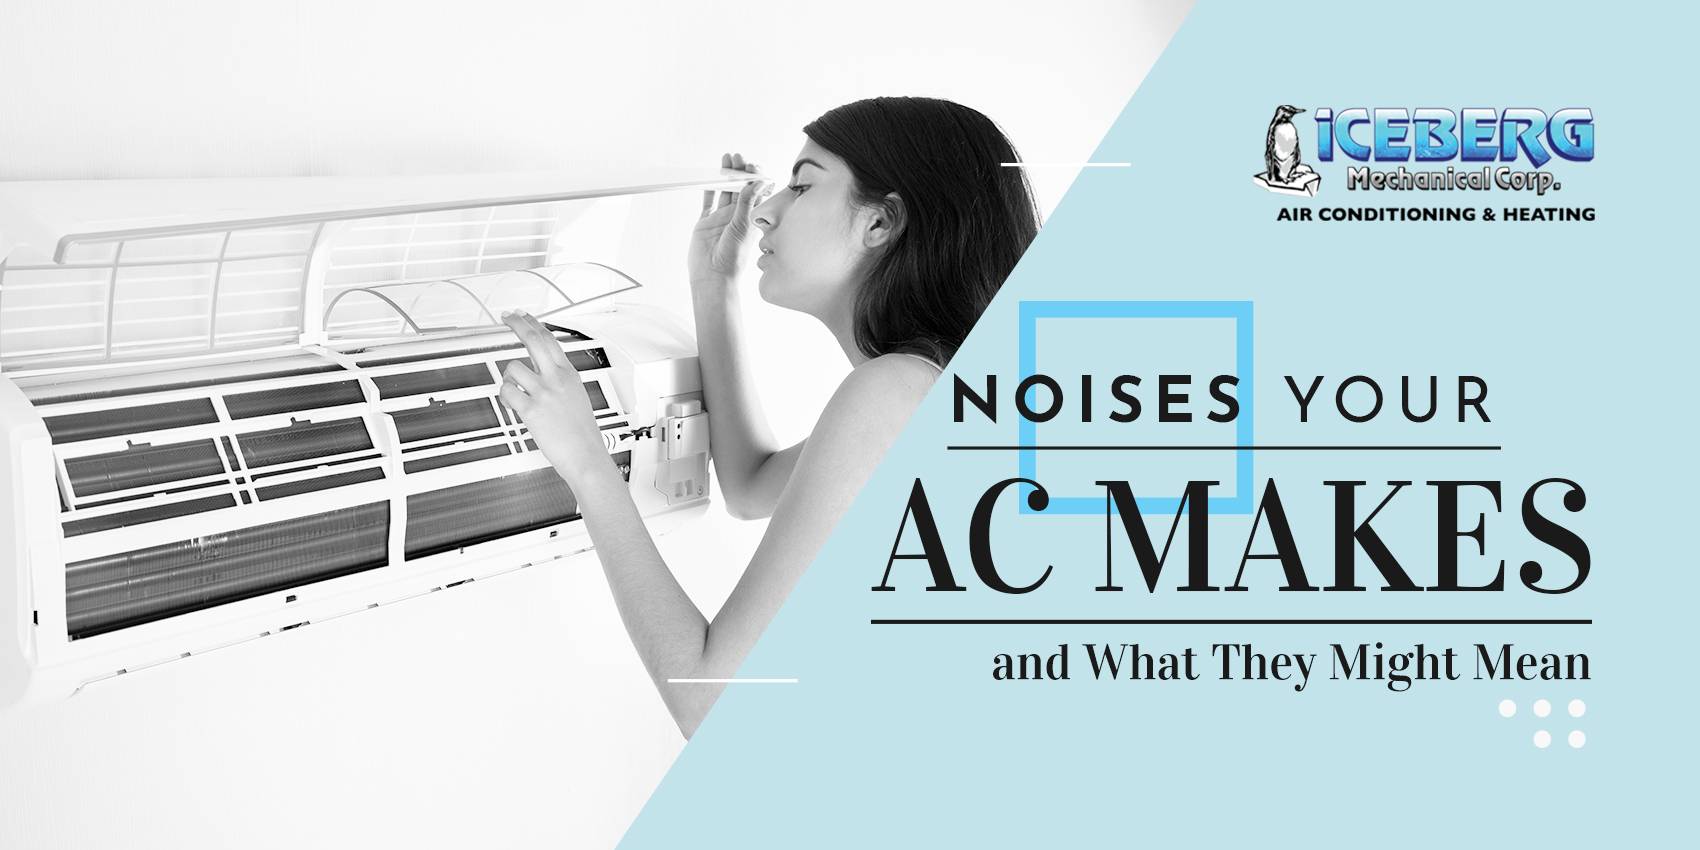 Noises Your AC Makes and What They Might Mean